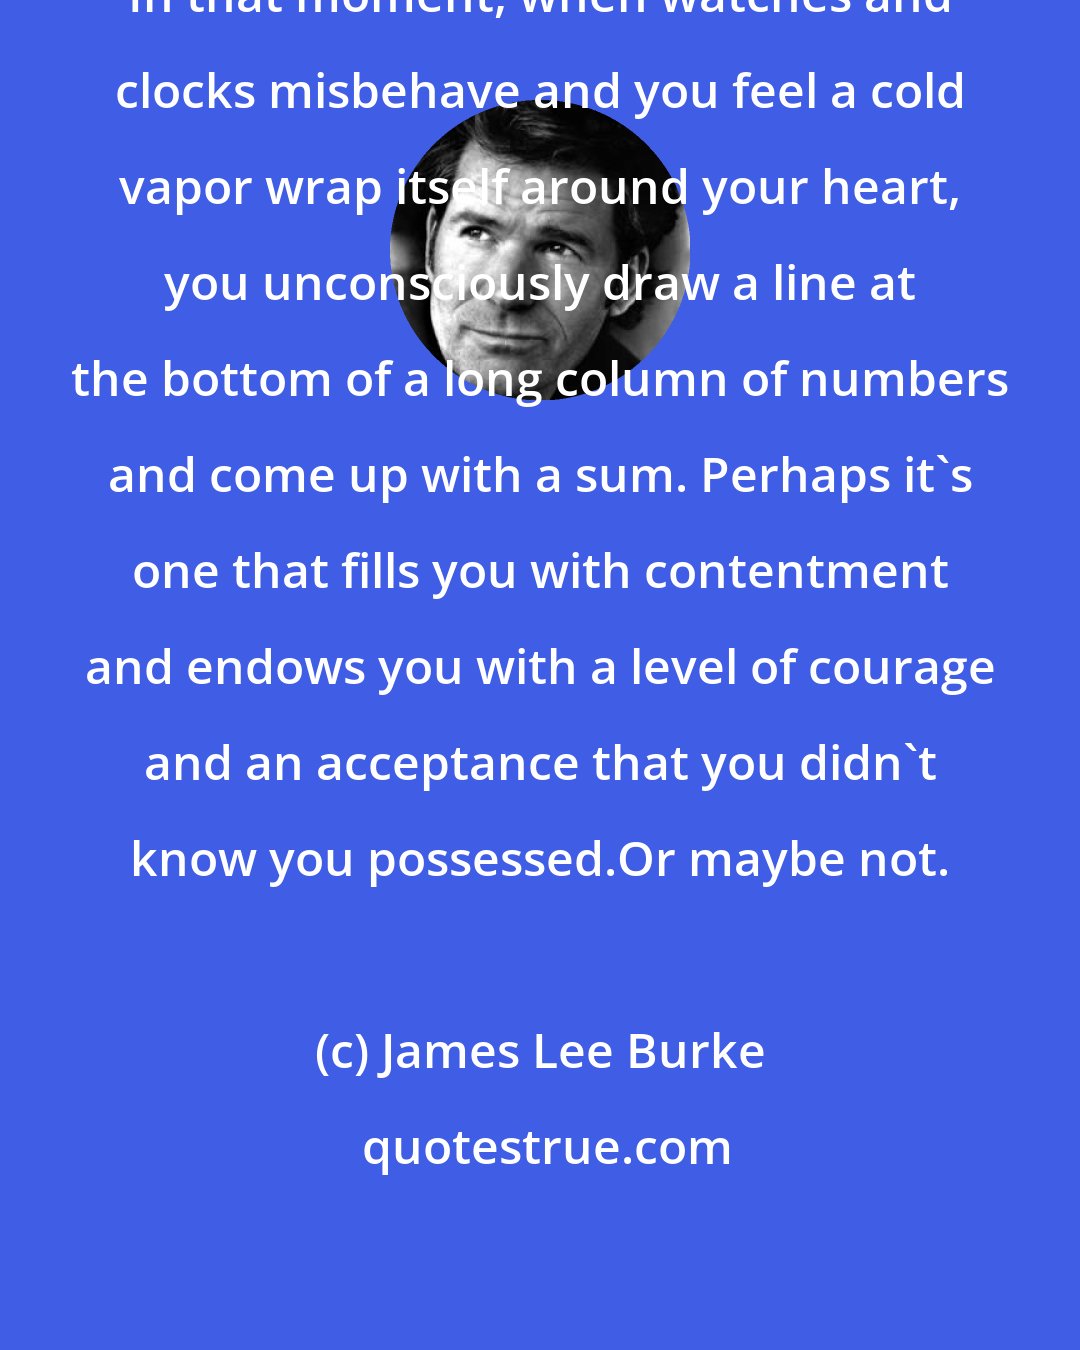 James Lee Burke: In that moment, when watches and clocks misbehave and you feel a cold vapor wrap itself around your heart, you unconsciously draw a line at the bottom of a long column of numbers and come up with a sum. Perhaps it's one that fills you with contentment and endows you with a level of courage and an acceptance that you didn't know you possessed.Or maybe not.